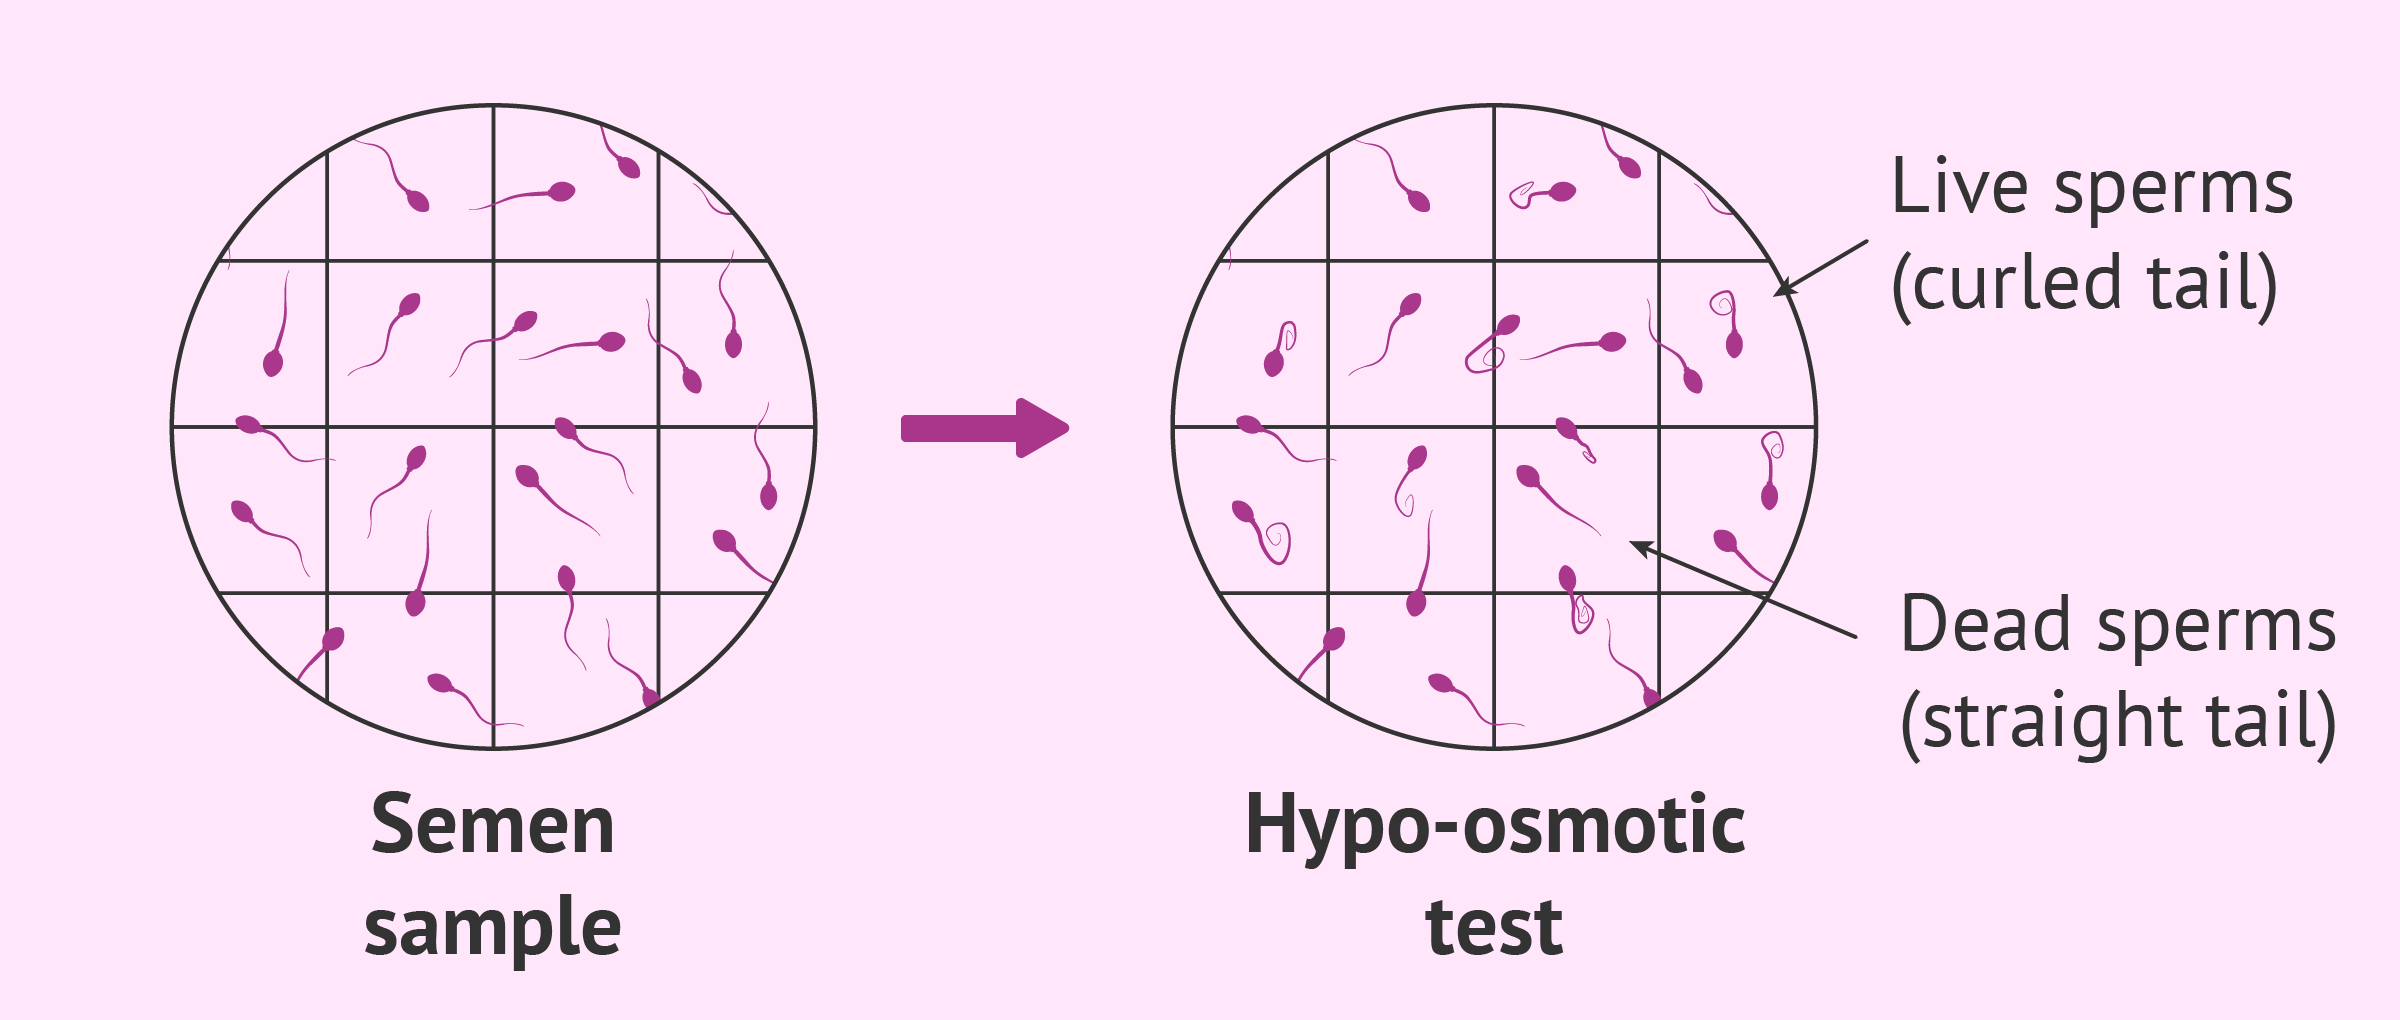 Necrospermia detection with a hypo-osmotic swelling test